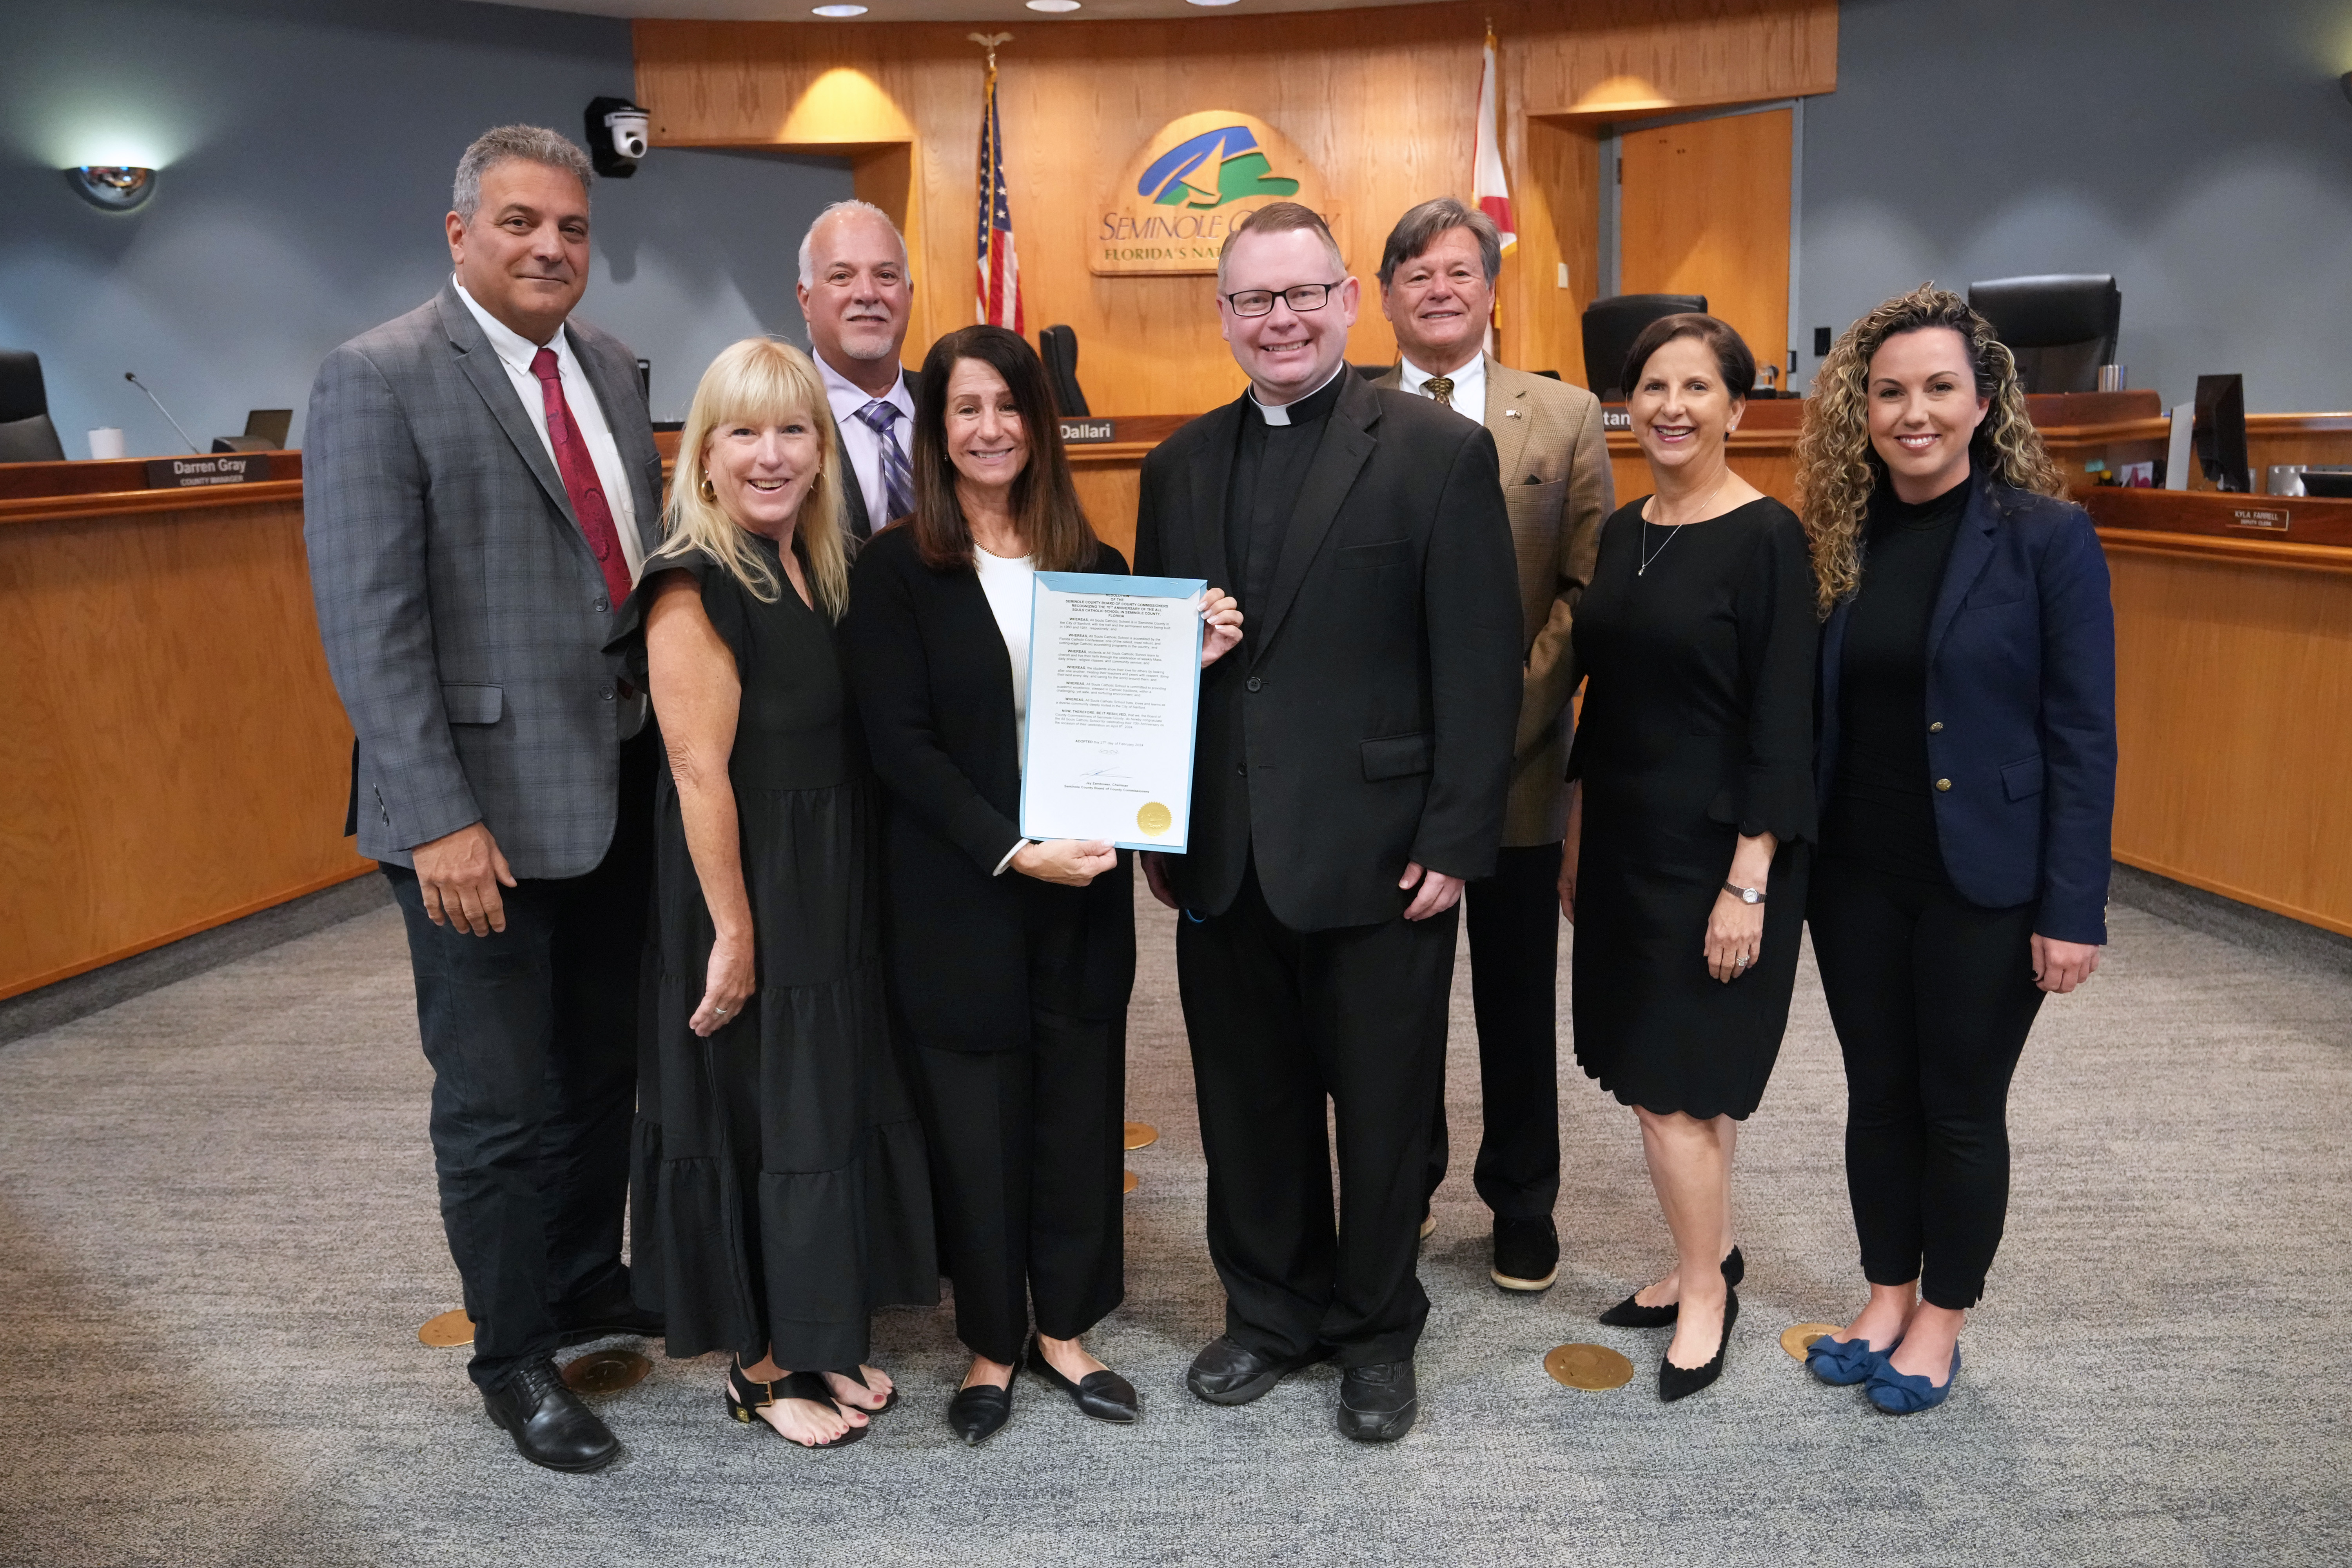 Resolution recognizing the 70th anniversary of the All Souls Catholic School in Seminole County, FL. Countywide (Kimberly Walker, All Souls Catholic School)